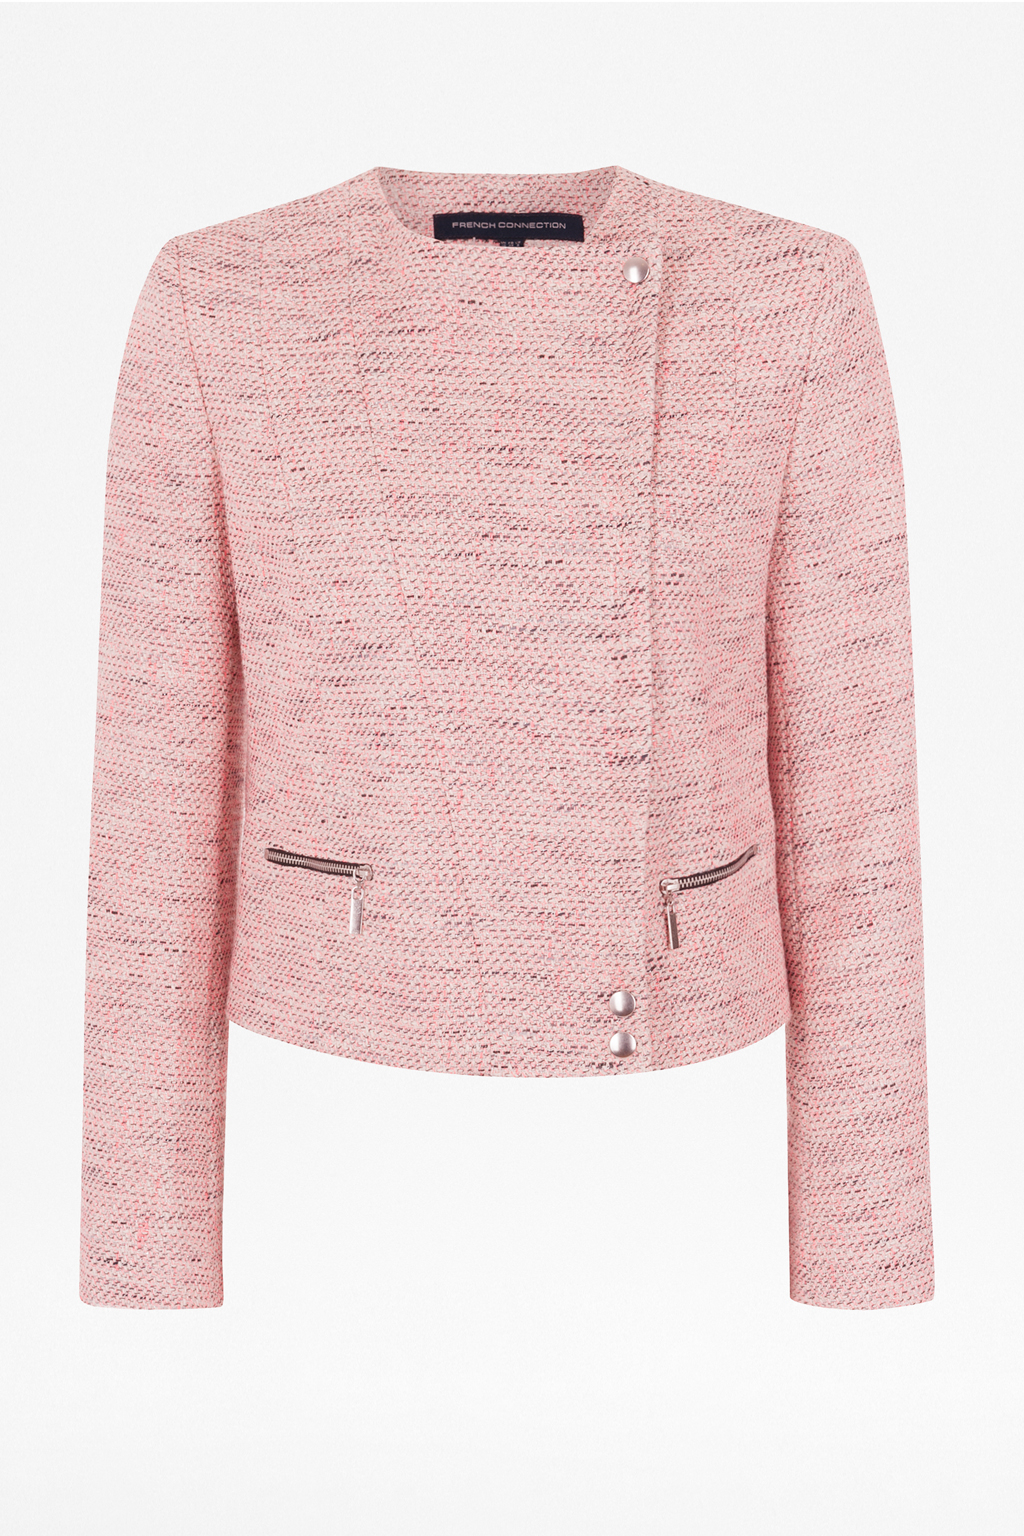 French connection Bel Air Tweed Biker Jacket in Pink | Lyst